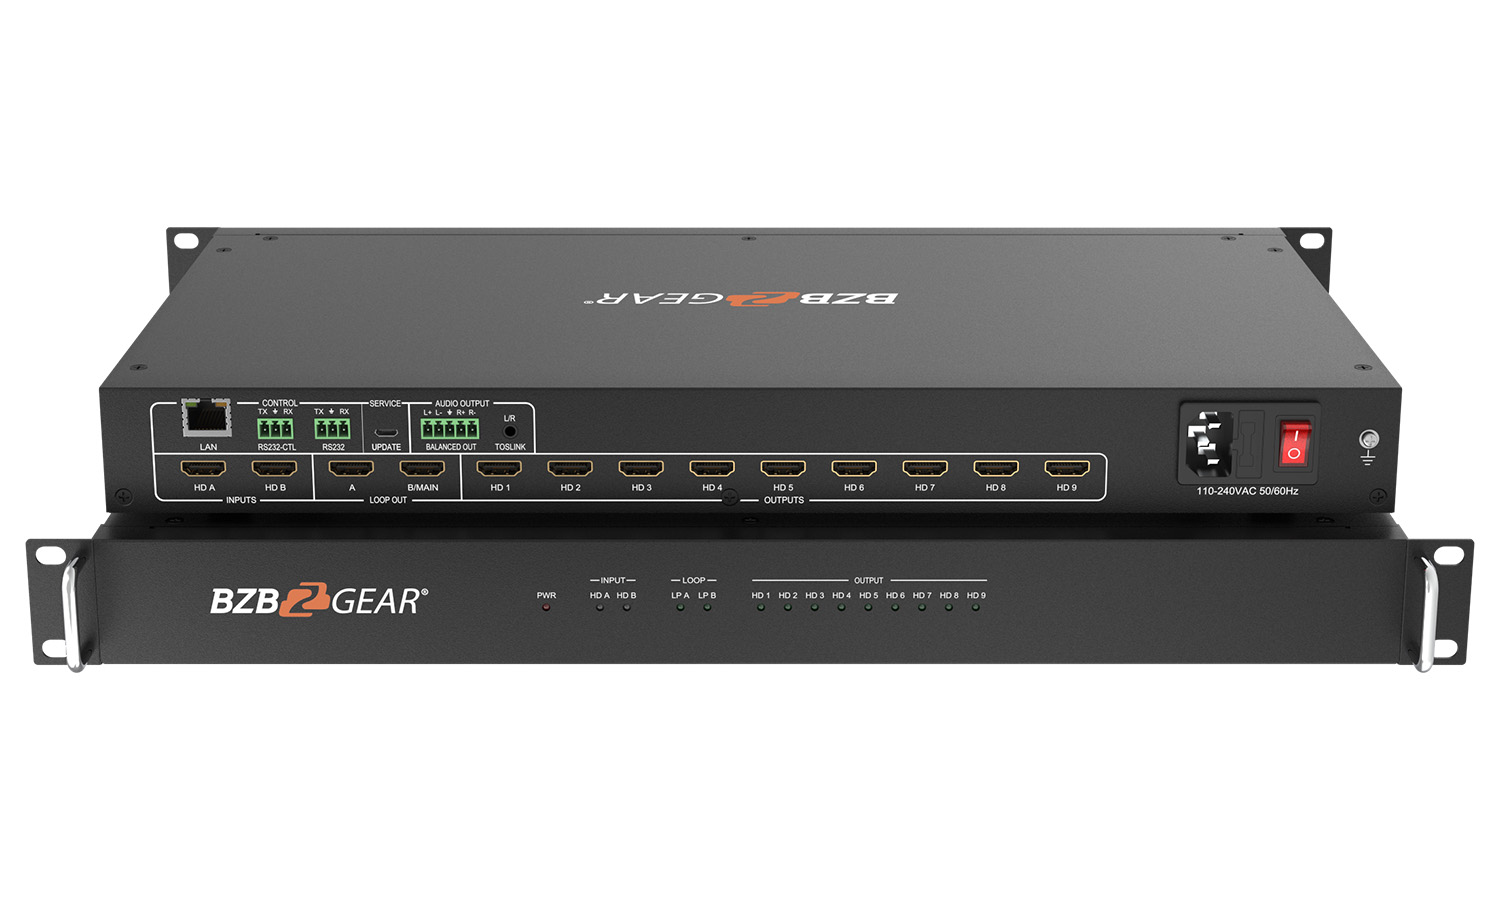 BG-UHD-VW29 4K UHD HDMI 2.0 3X3 Video Wall Processor with HDCP 2.2 and IP/RS232 Control by BZBGEAR